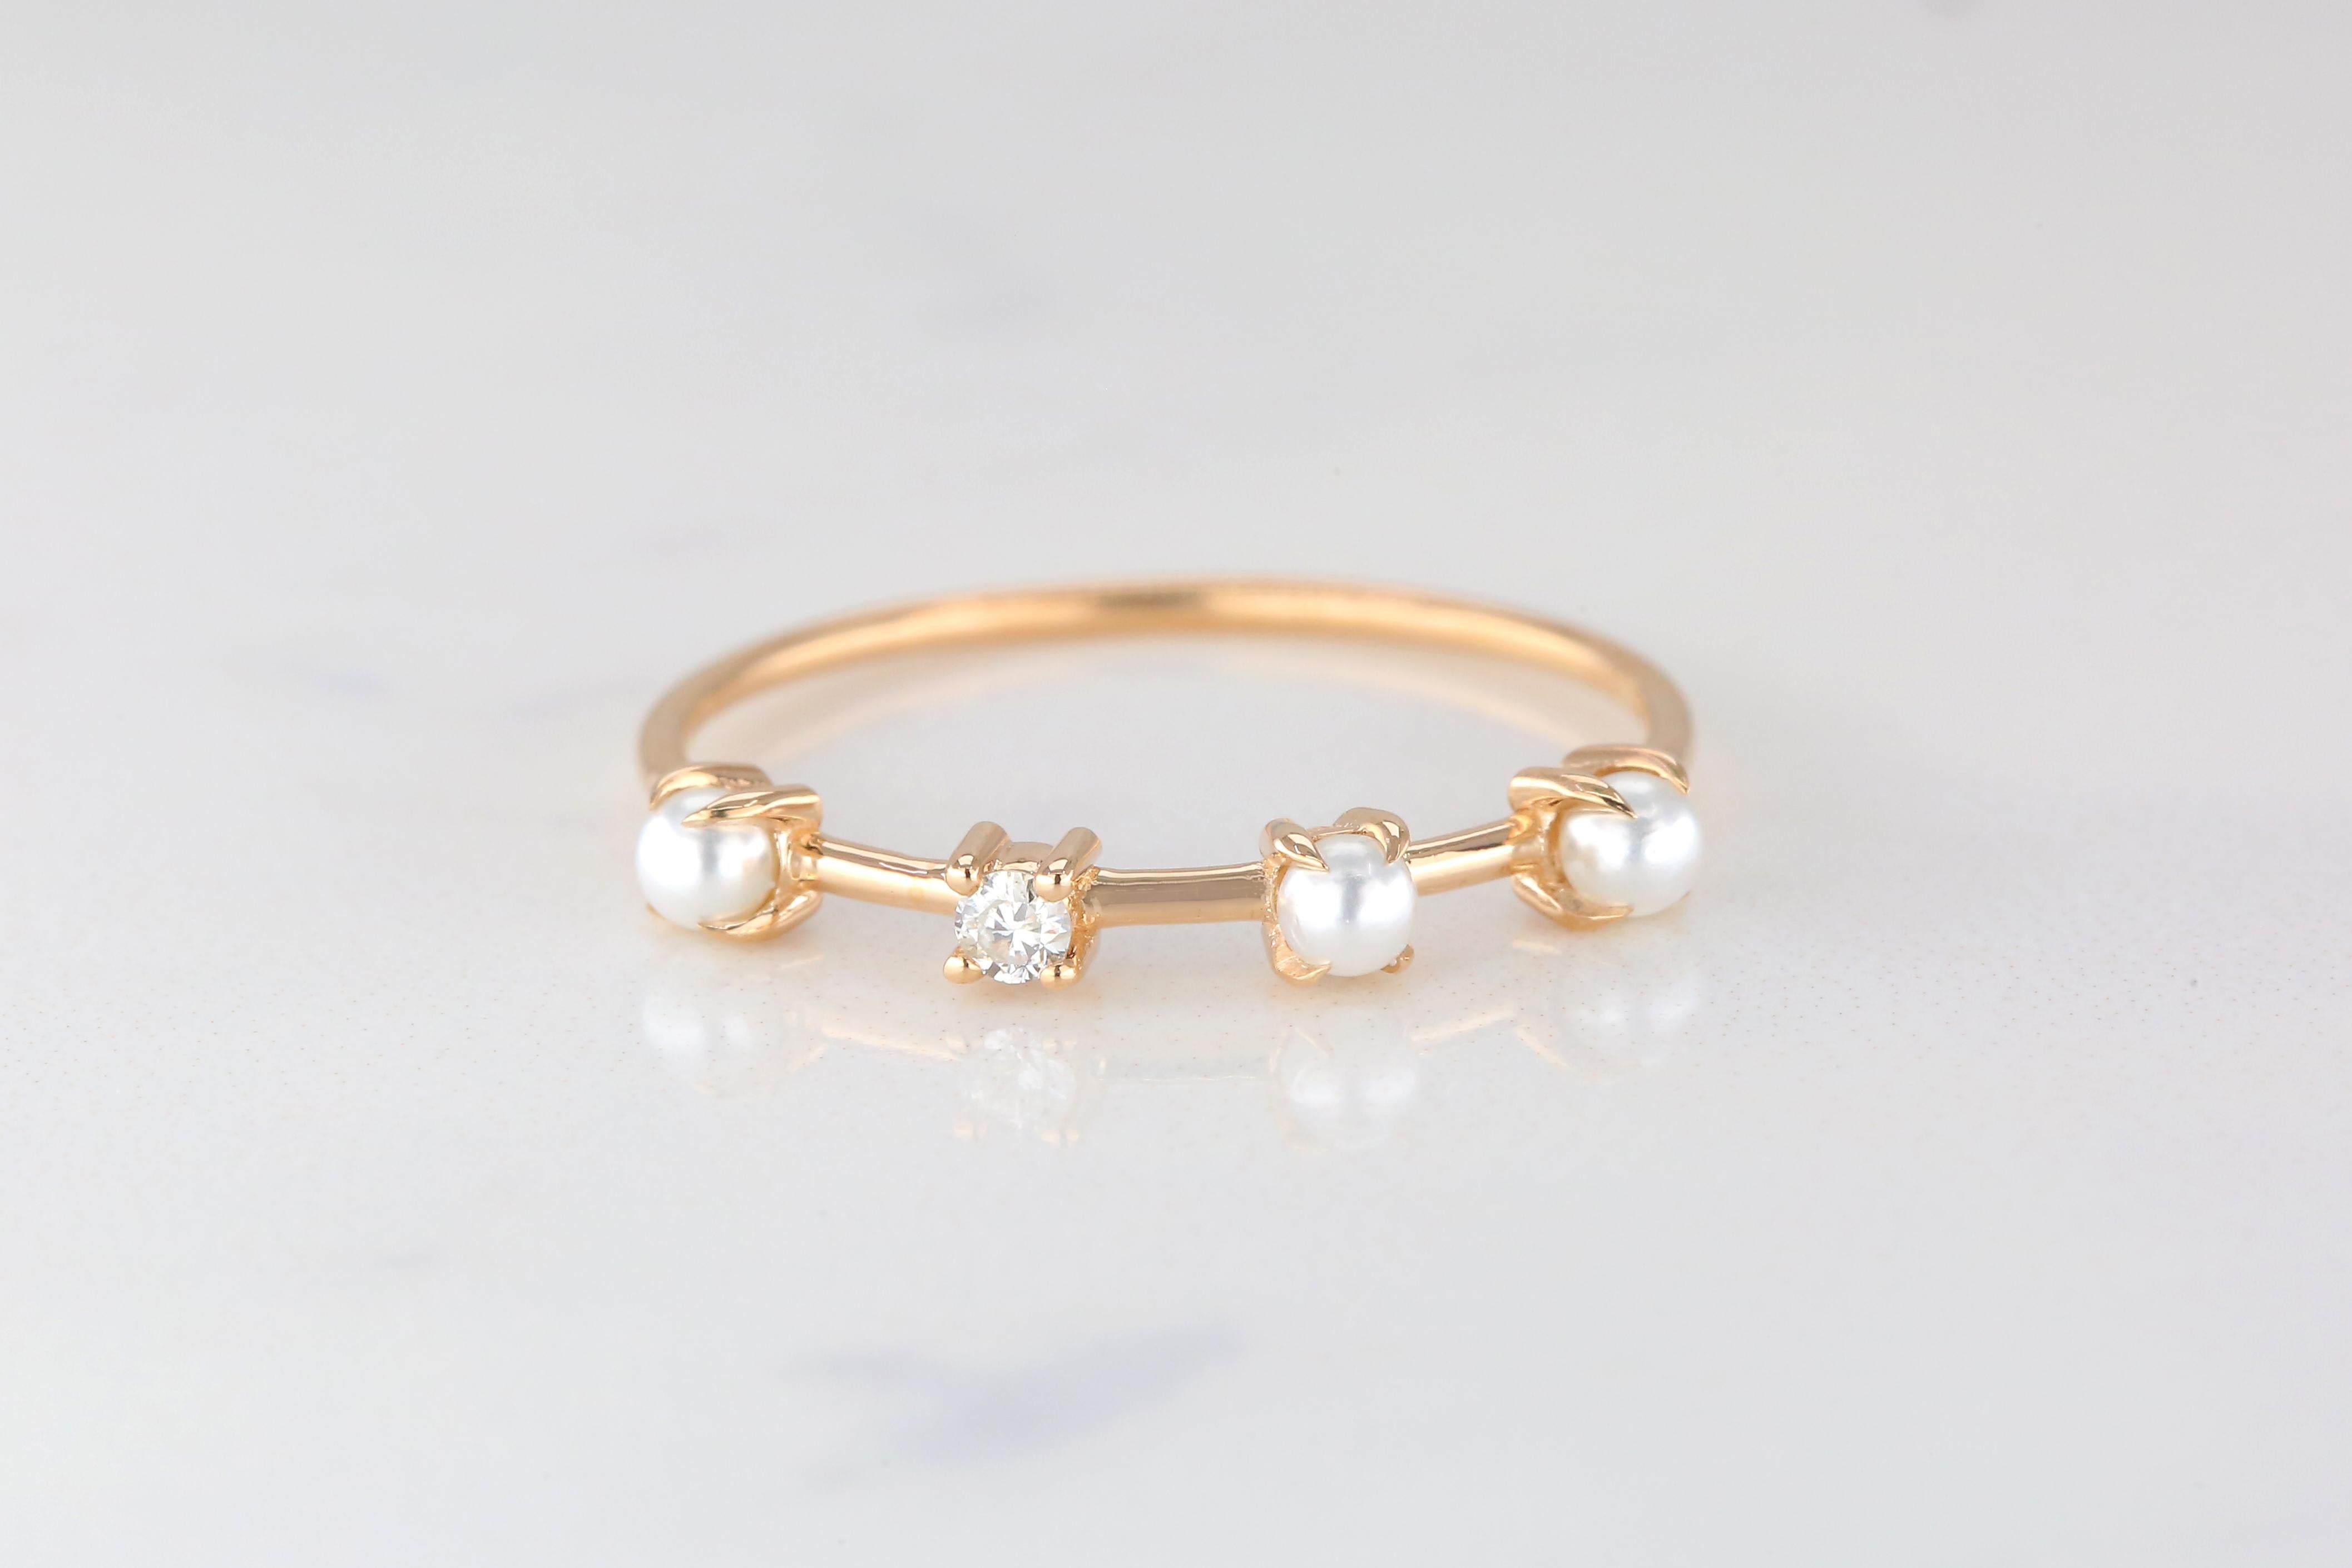 For Sale:  Three Pearl and Diamond Ring, 14K Gold Pearl Ring, Minimalist Style Ring 6